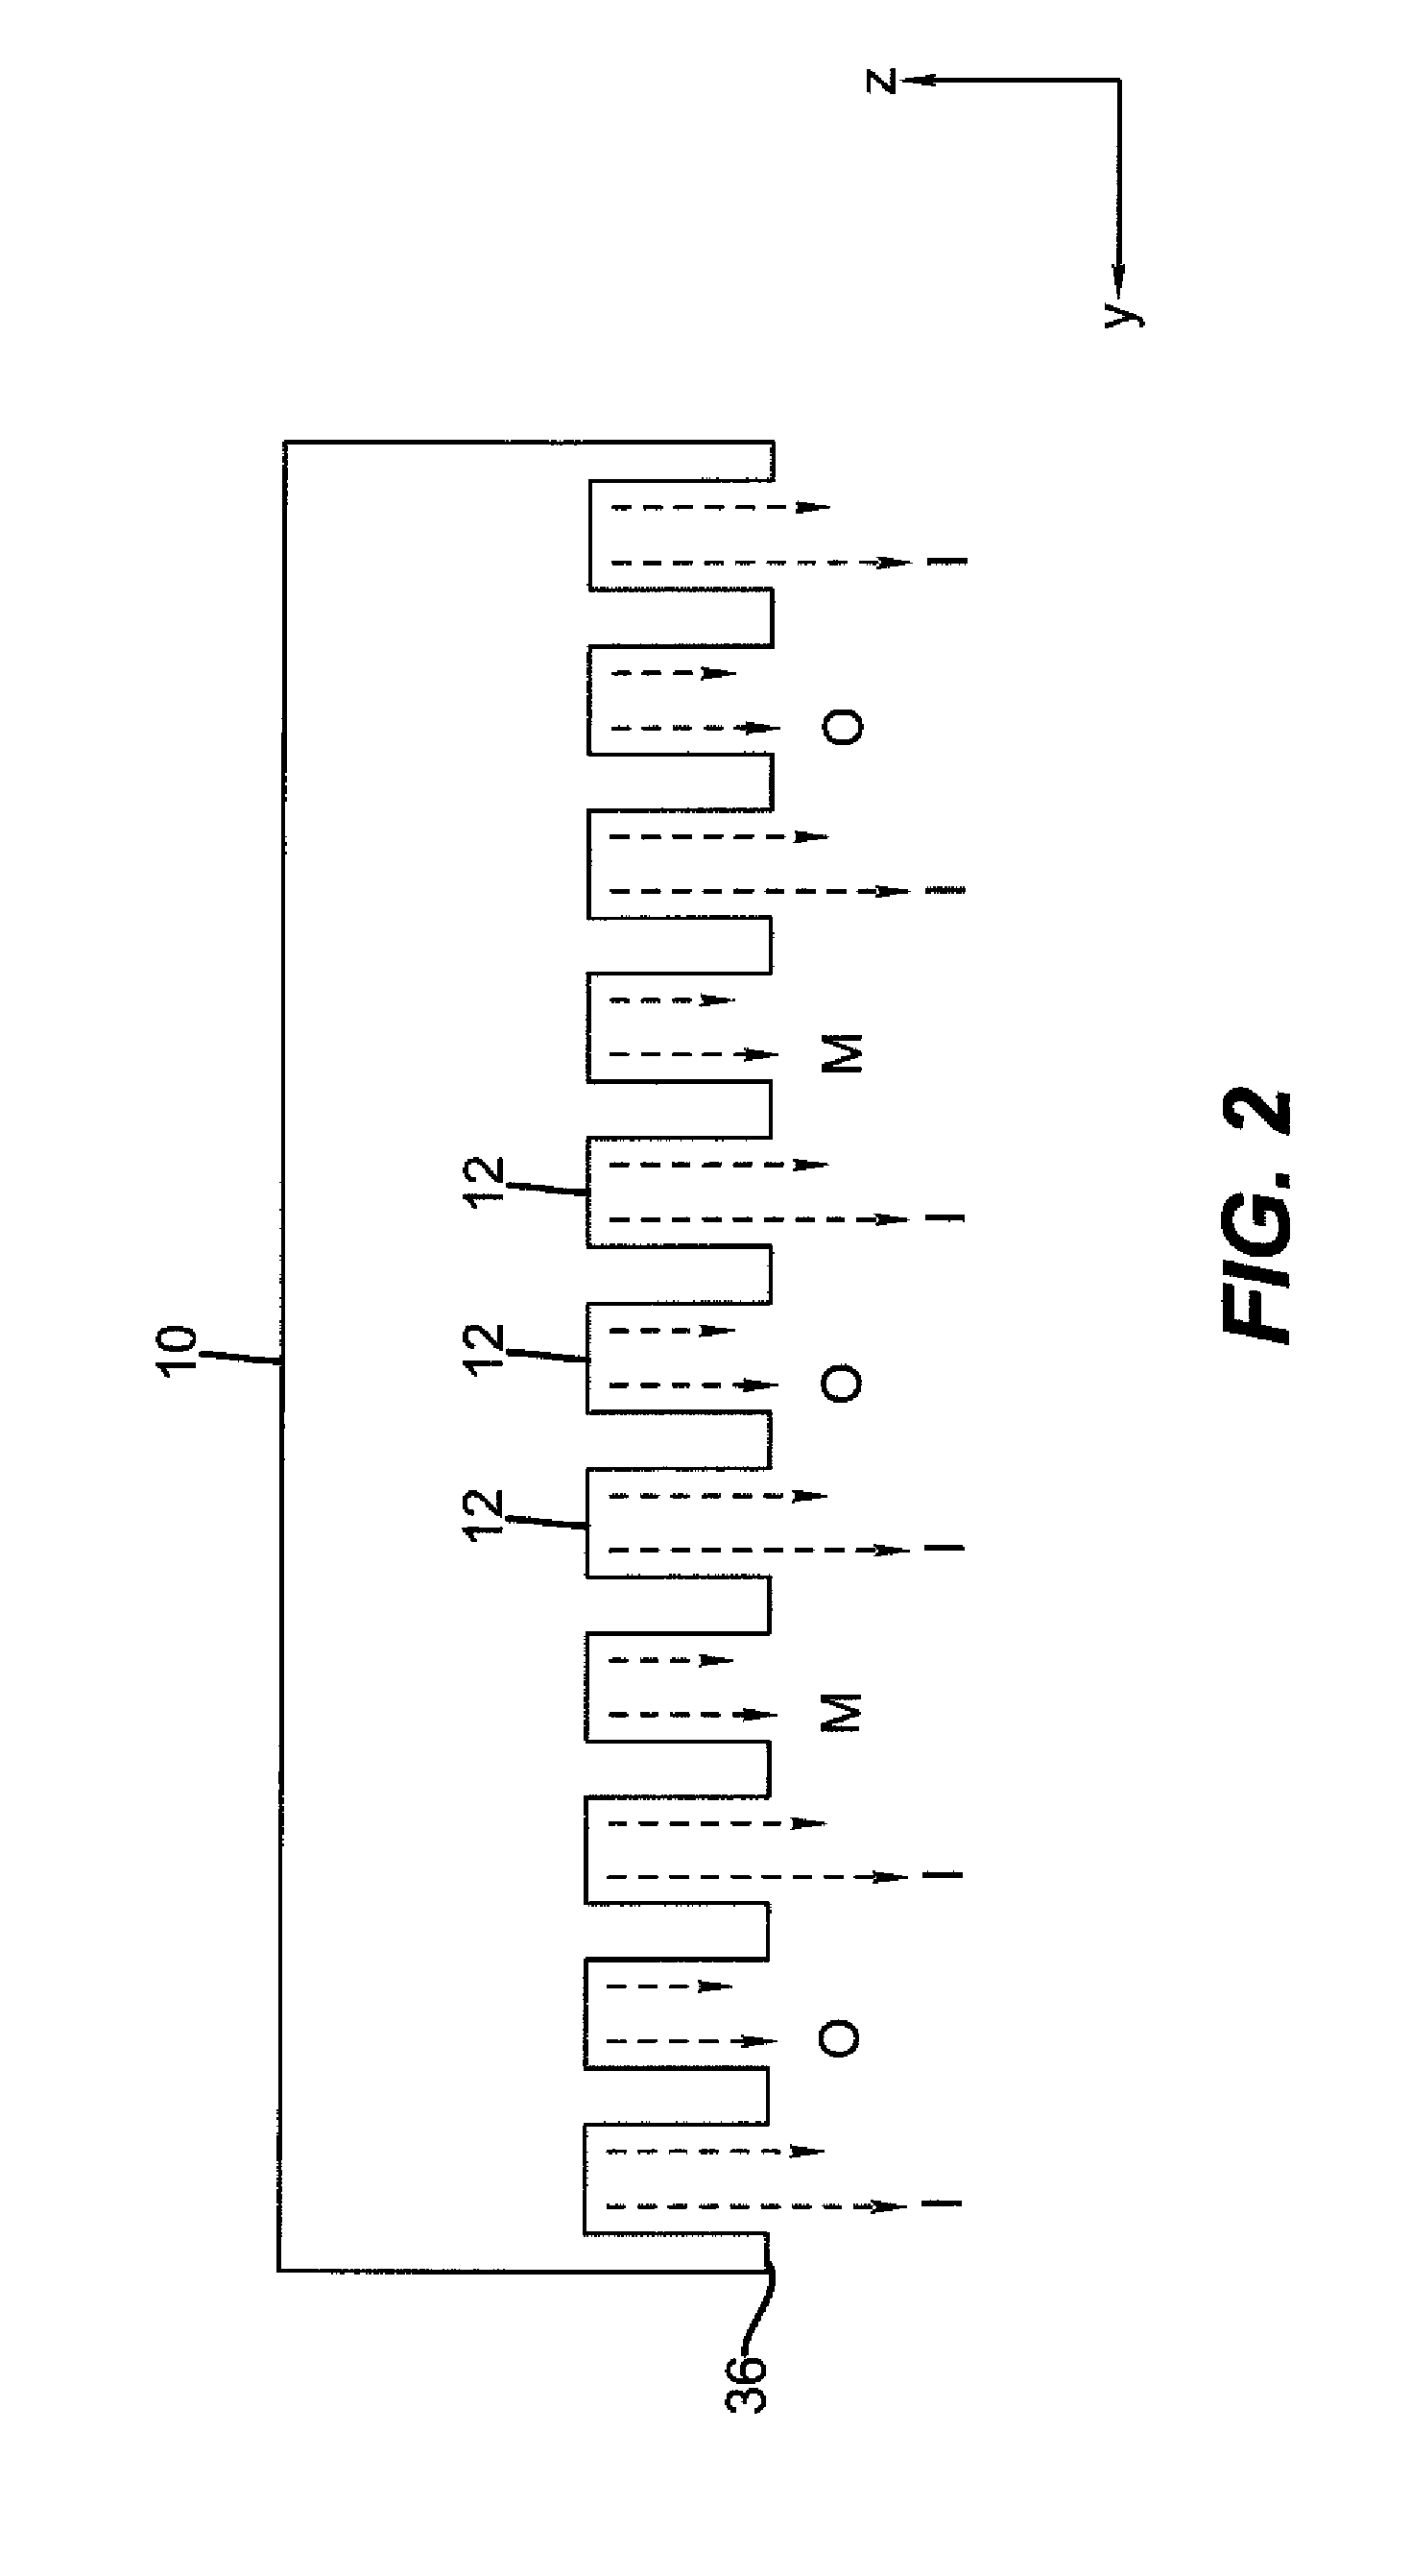 System for thin film deposition utilizing compensating forces